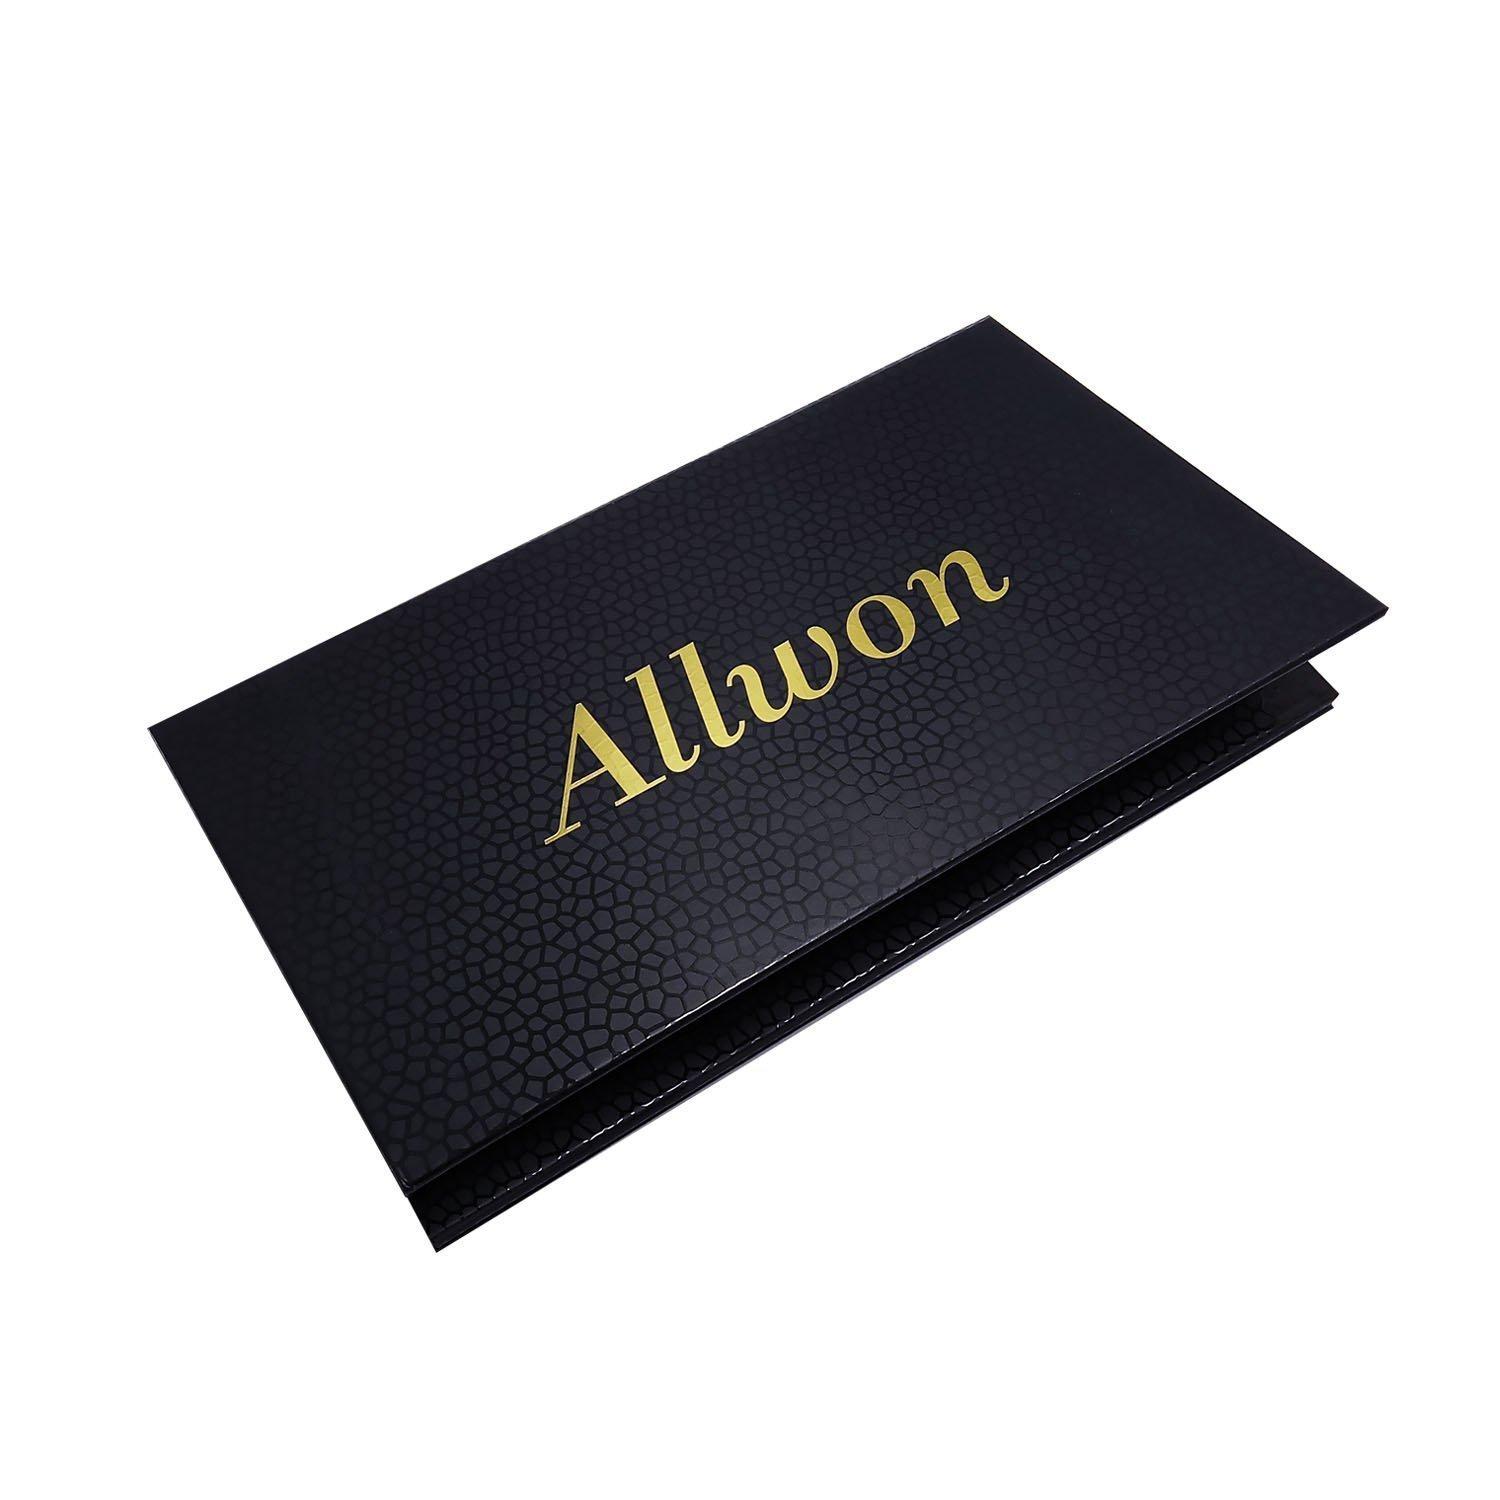  Allwon Magnetic Palette Empty Eyeshadow Makeup Palette with  Shatterproof Mirror for Eyeshadow Lipstick Blush Powder (Black) : Beauty &  Personal Care